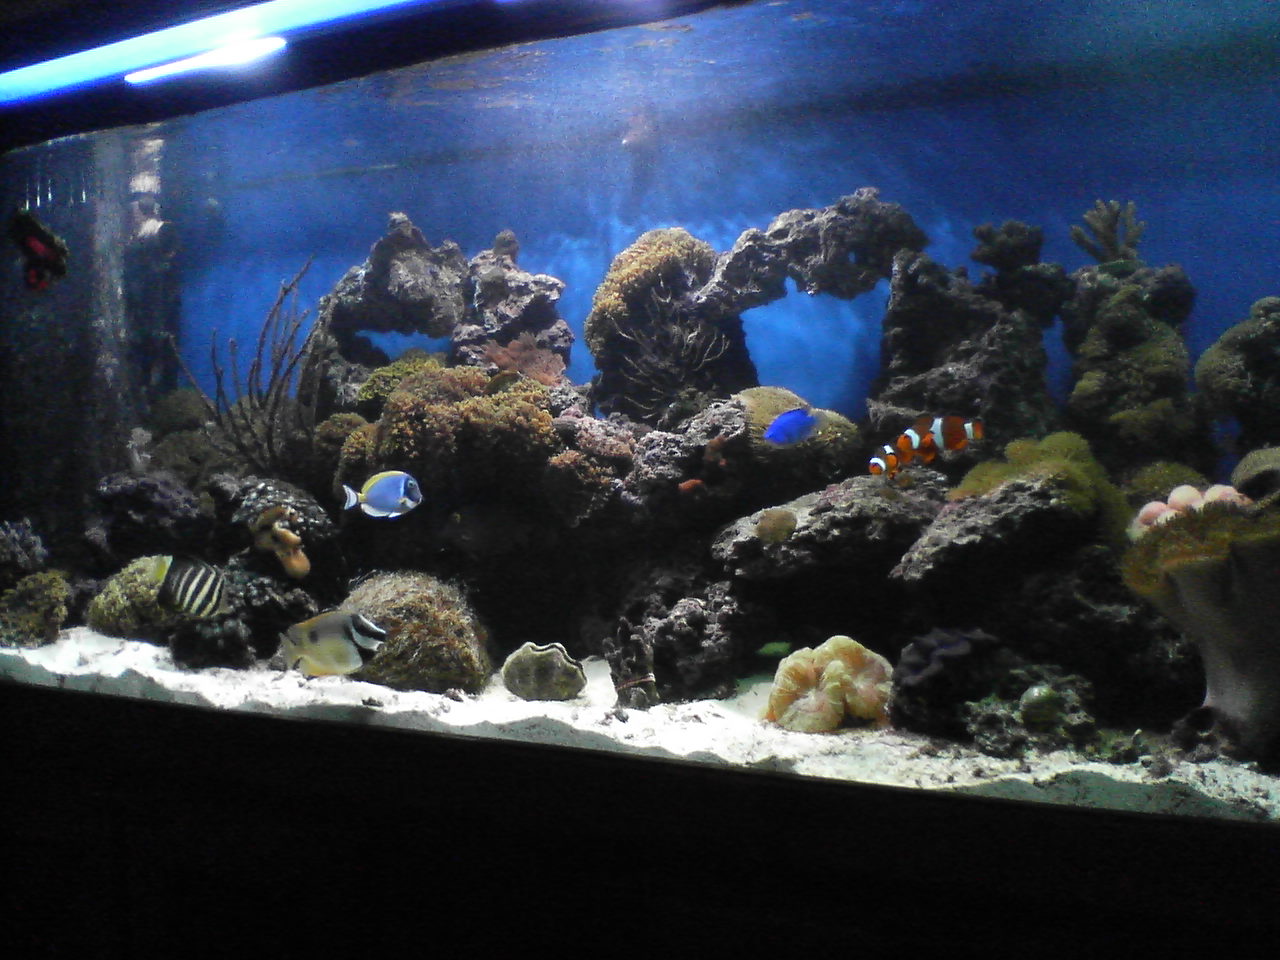 This is an updated photo of my 125 gallon reef tank.  See photo album for ~1 year tank growth and additions.